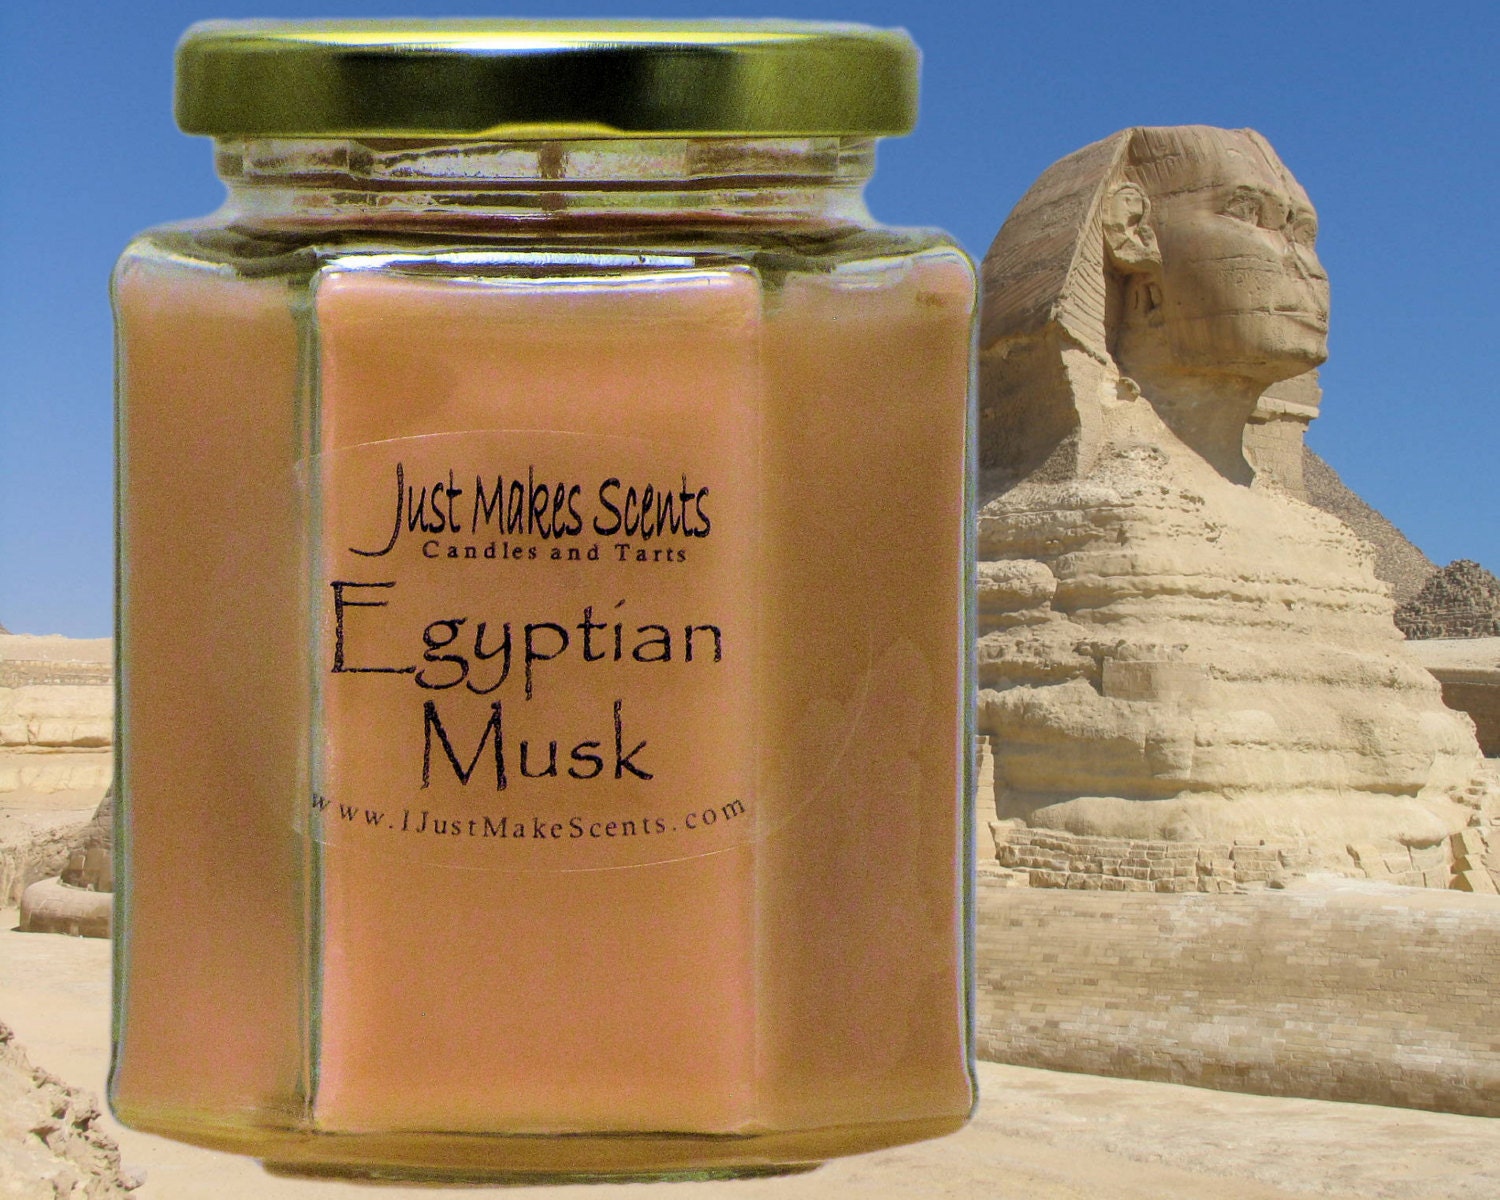 Egyptian Musk Blended Soy Candle - Scented Candles